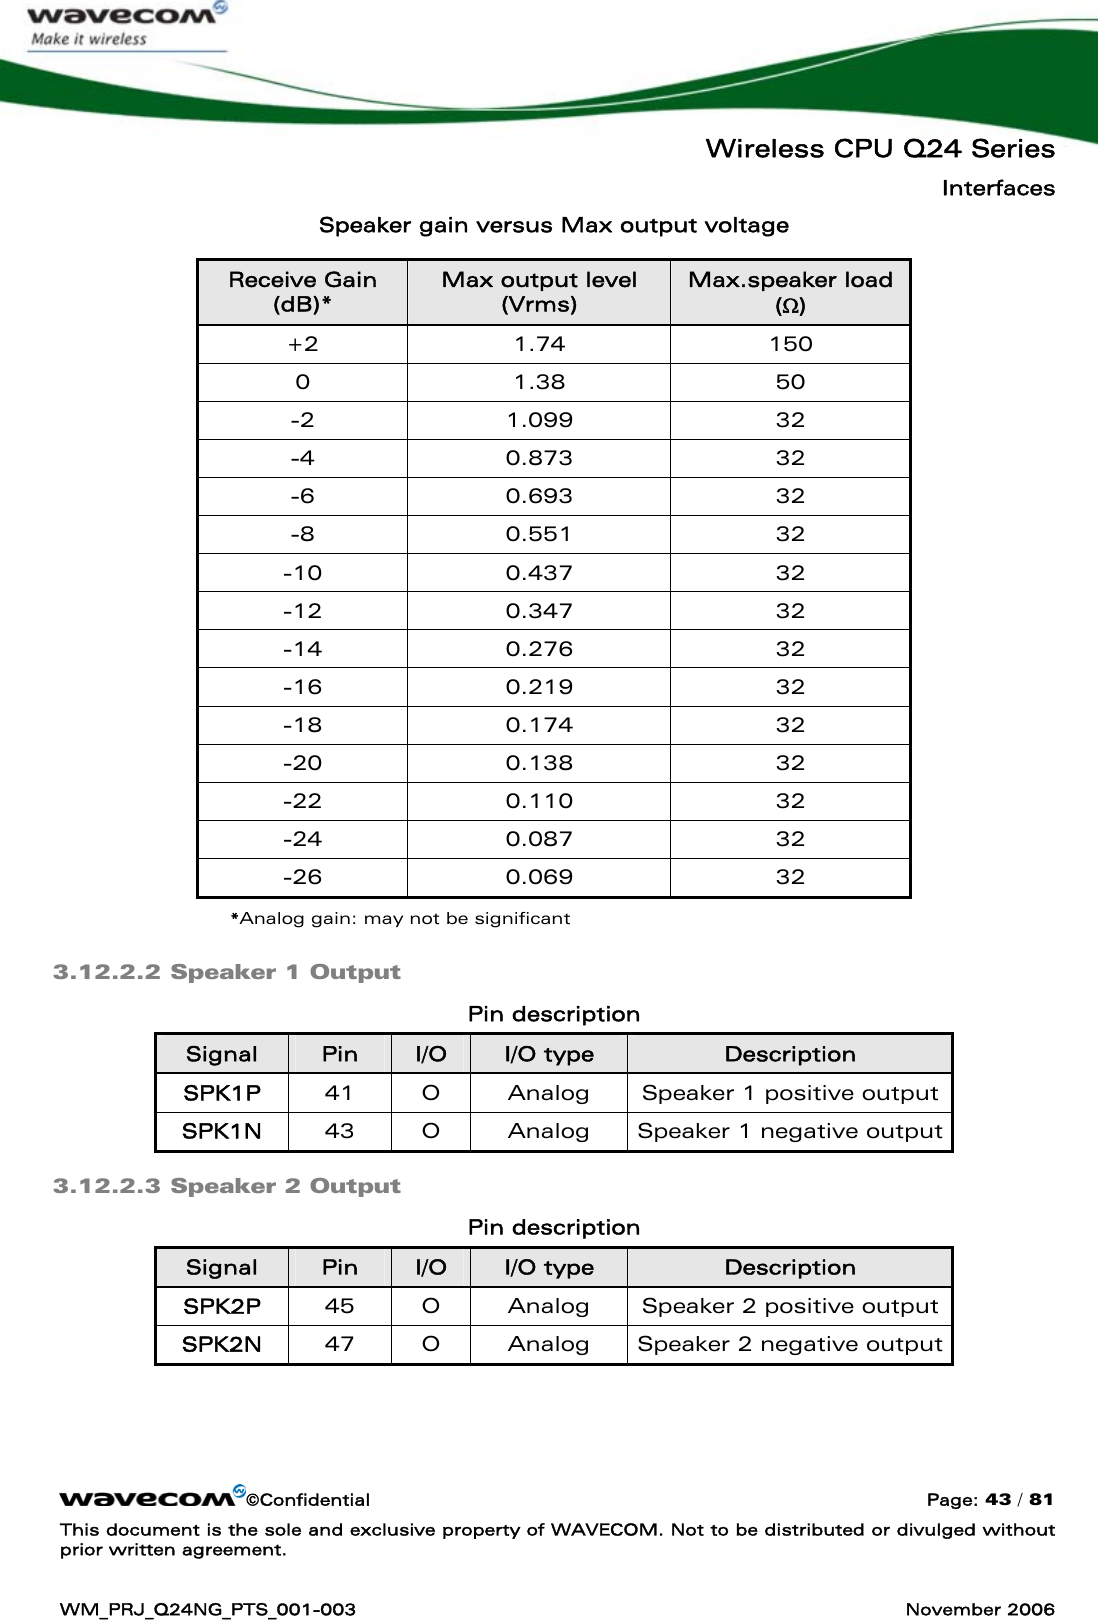   Wireless CPU Q24 Series Interfaces ©Confidential  Page: 43 / 81 This document is the sole and exclusive property of WAVECOM. Not to be distributed or divulged without prior written agreement.  WM_PRJ_Q24NG_PTS_001-003  November 2006  Speaker gain versus Max output voltage Receive Gain (dB)* Max output level (Vrms) Max.speaker load (Ω) +2 1.74  150 0 1.38  50 -2 1.099  32 -4 0.873  32 -6 0.693  32 -8 0.551  32 -10 0.437  32 -12 0.347  32 -14 0.276  32 -16 0.219  32 -18 0.174  32 -20 0.138  32 -22 0.110  32 -24 0.087  32 -26 0.069  32 *Analog gain: may not be significant 3.12.2.2 Speaker 1 Output Pin description Signal  Pin  I/O  I/O type  Description SPK1P  41  O  Analog  Speaker 1 positive output SPK1N  43  O  Analog  Speaker 1 negative output 3.12.2.3 Speaker 2 Output Pin description Signal  Pin  I/O  I/O type  Description SPK2P  45  O  Analog  Speaker 2 positive output SPK2N  47  O  Analog  Speaker 2 negative output  